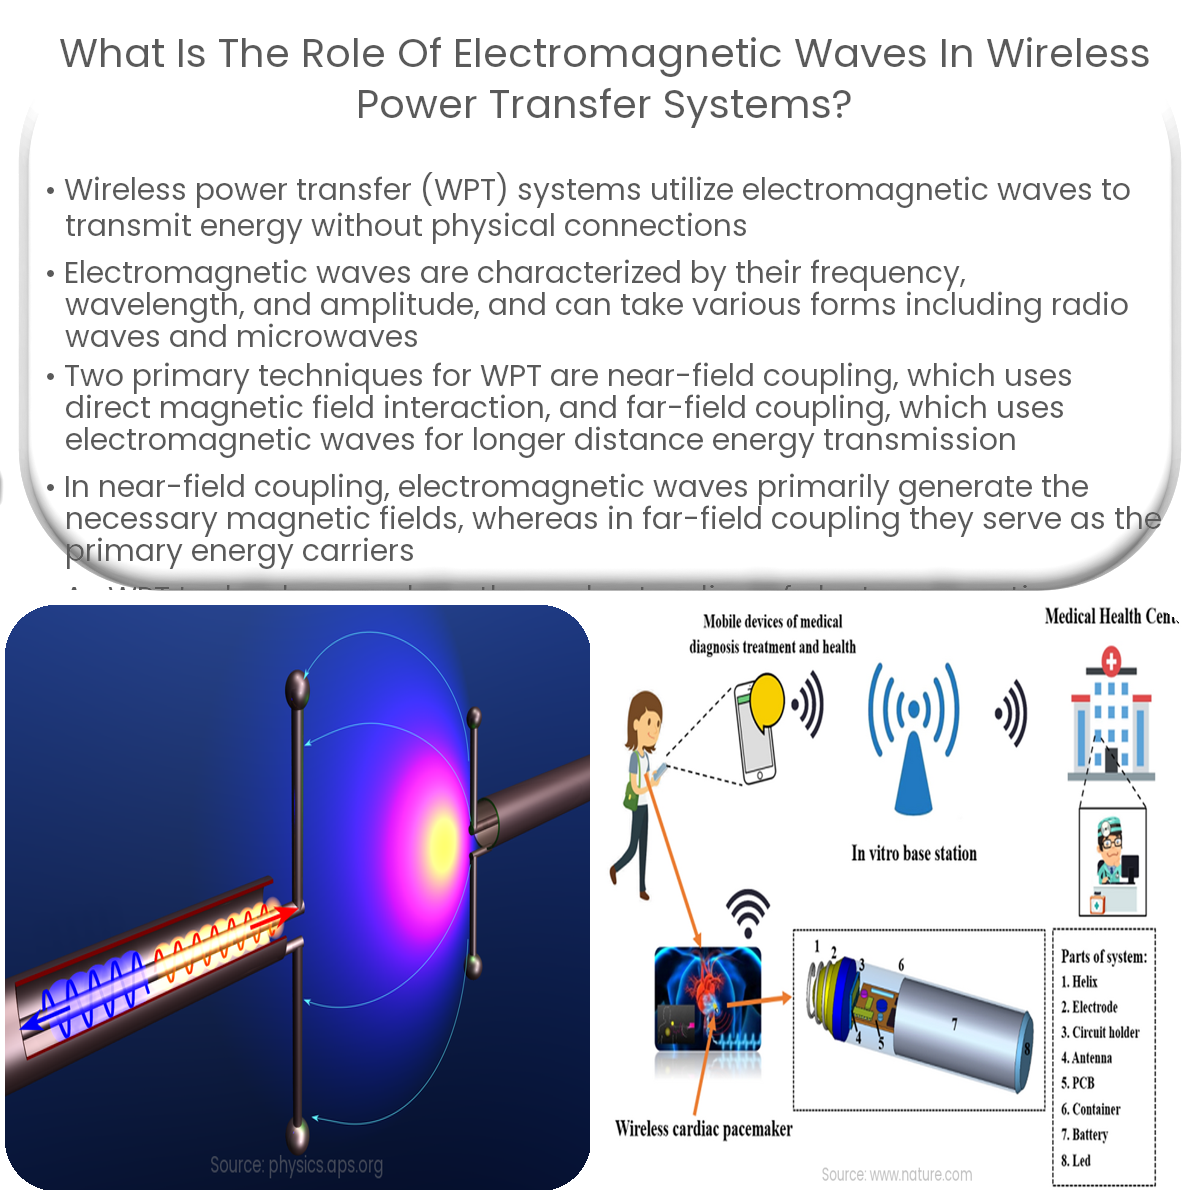 What is the role of electromagnetic waves in wireless power transfer systems?